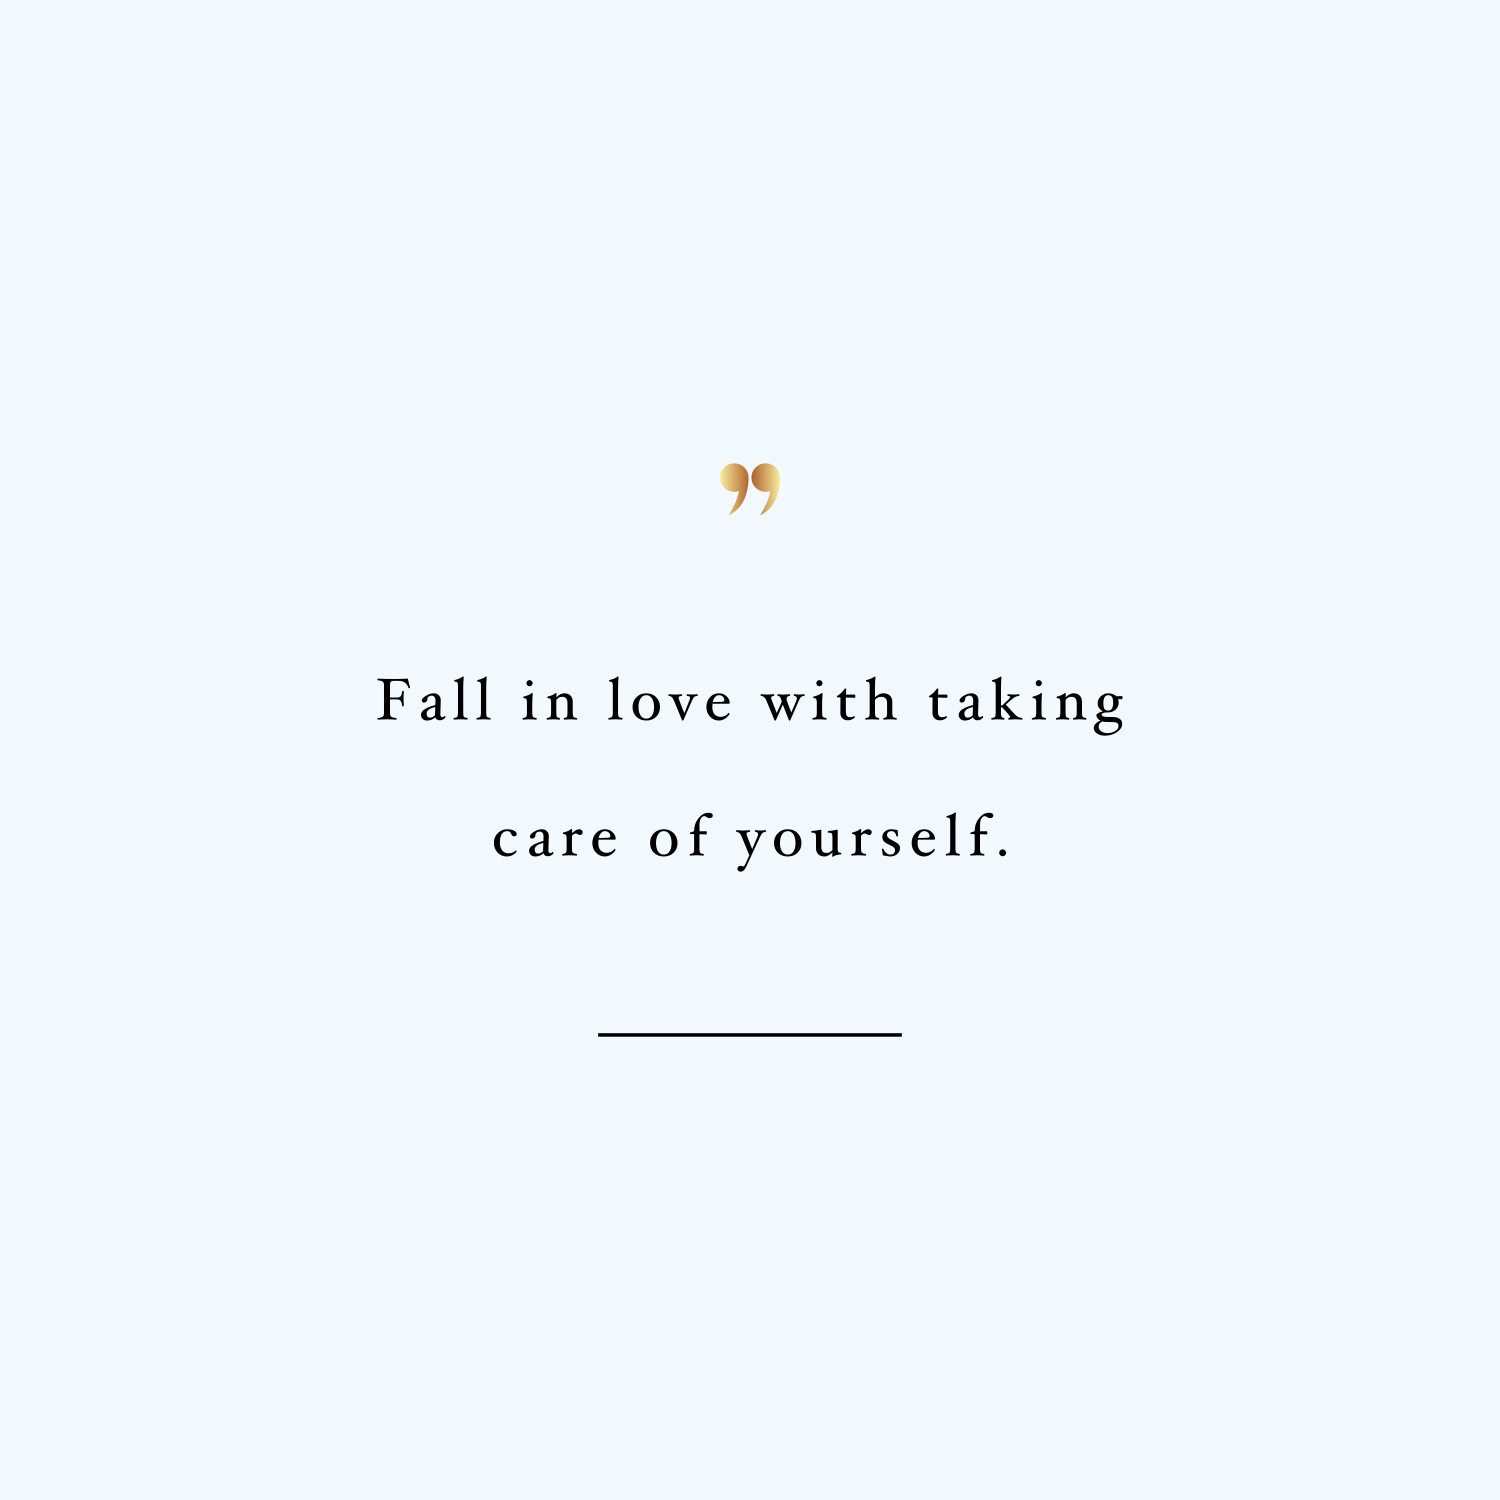 Fall in love with yourself! Browse our collection of inspirational fitness and weight loss quotes and get instant exercise and healthy eating motivation. Transform positive thoughts into positive actions and get fit, healthy and happy! https://www.spotebi.com/workout-motivation/fall-in-love-with-yourself/